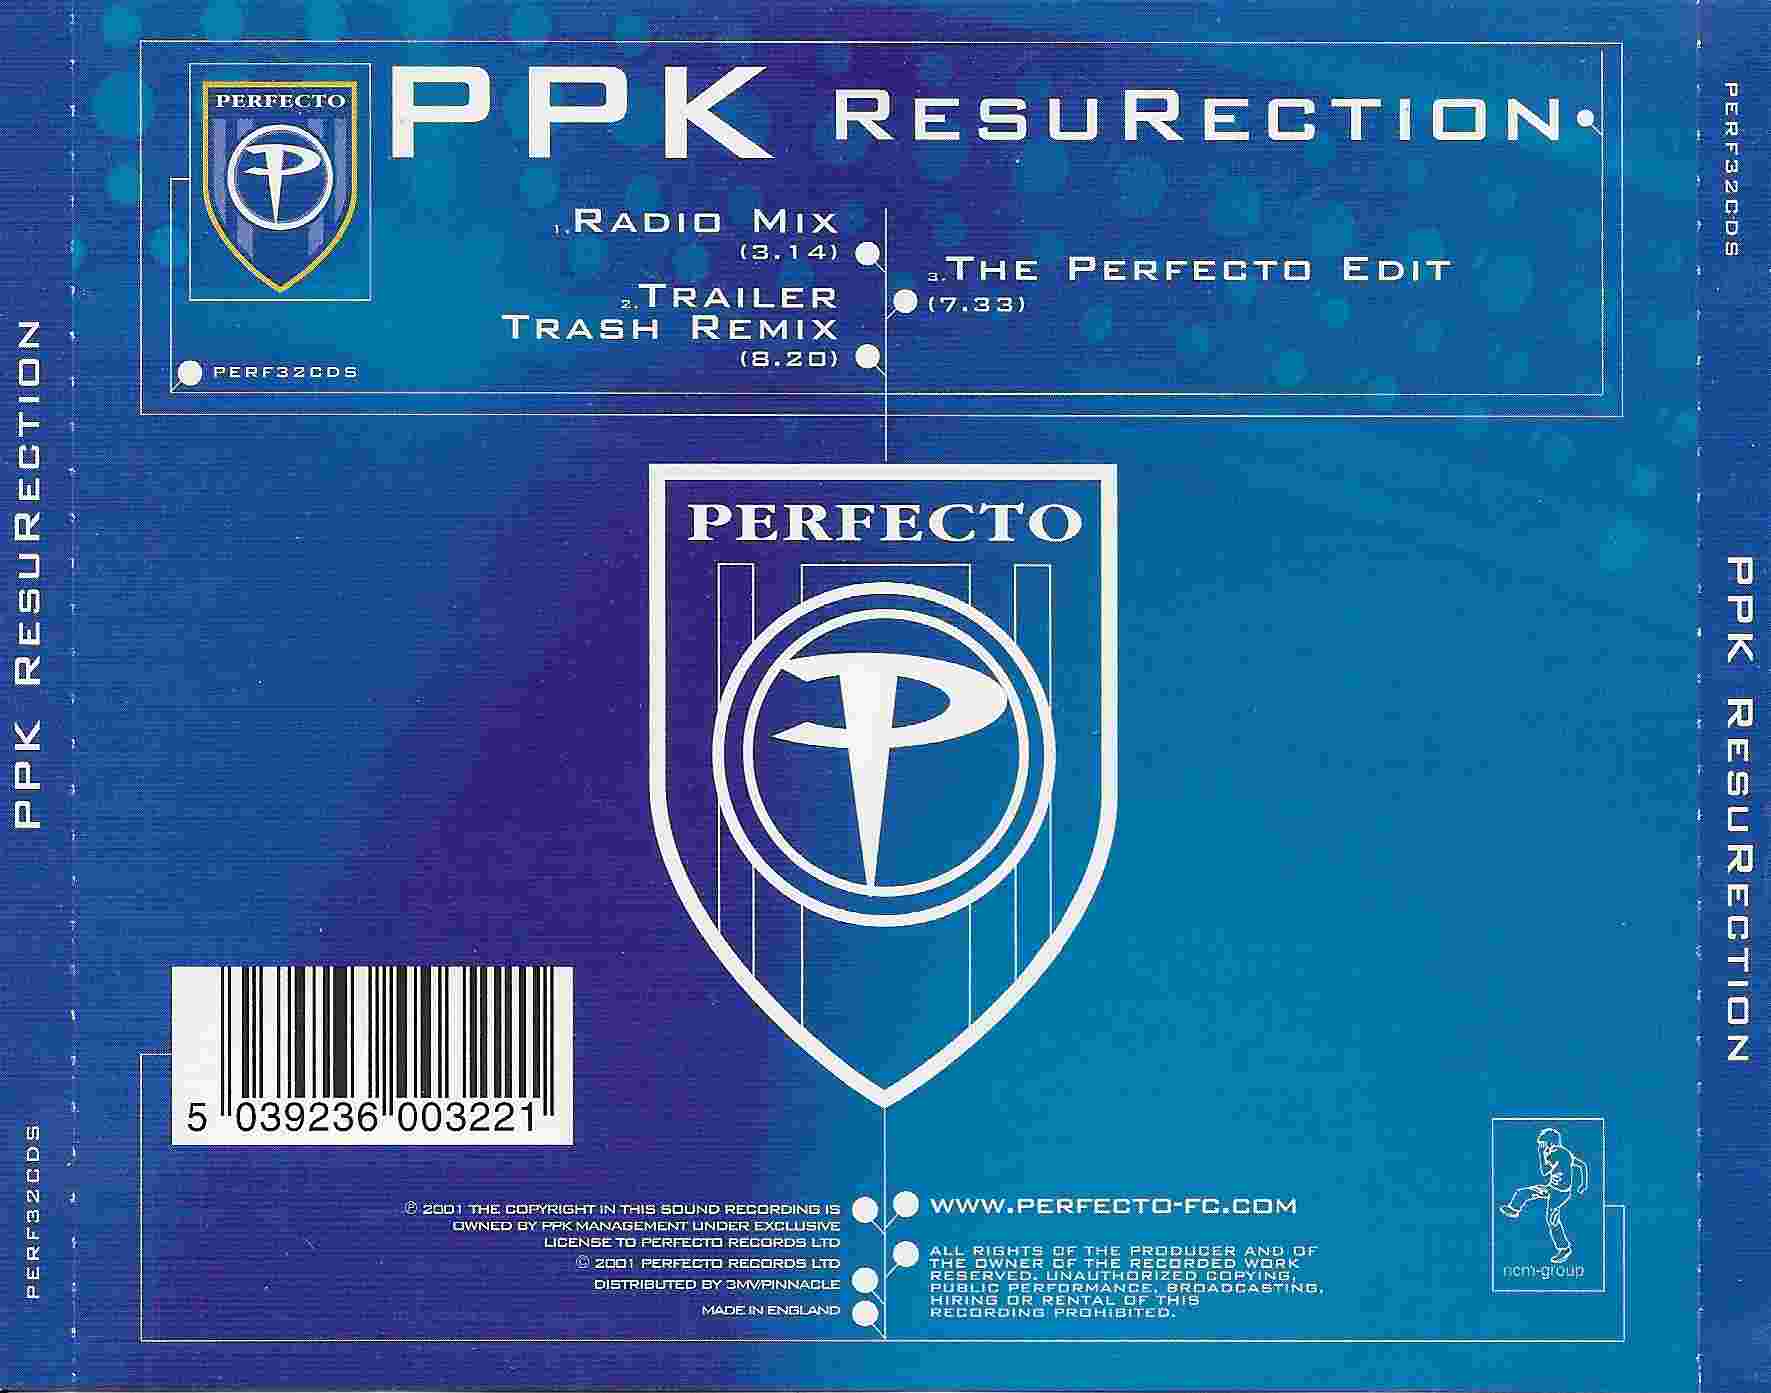 Picture of PERF 32 CDS ResuRection by artist Alexander Polyakov / PPK 